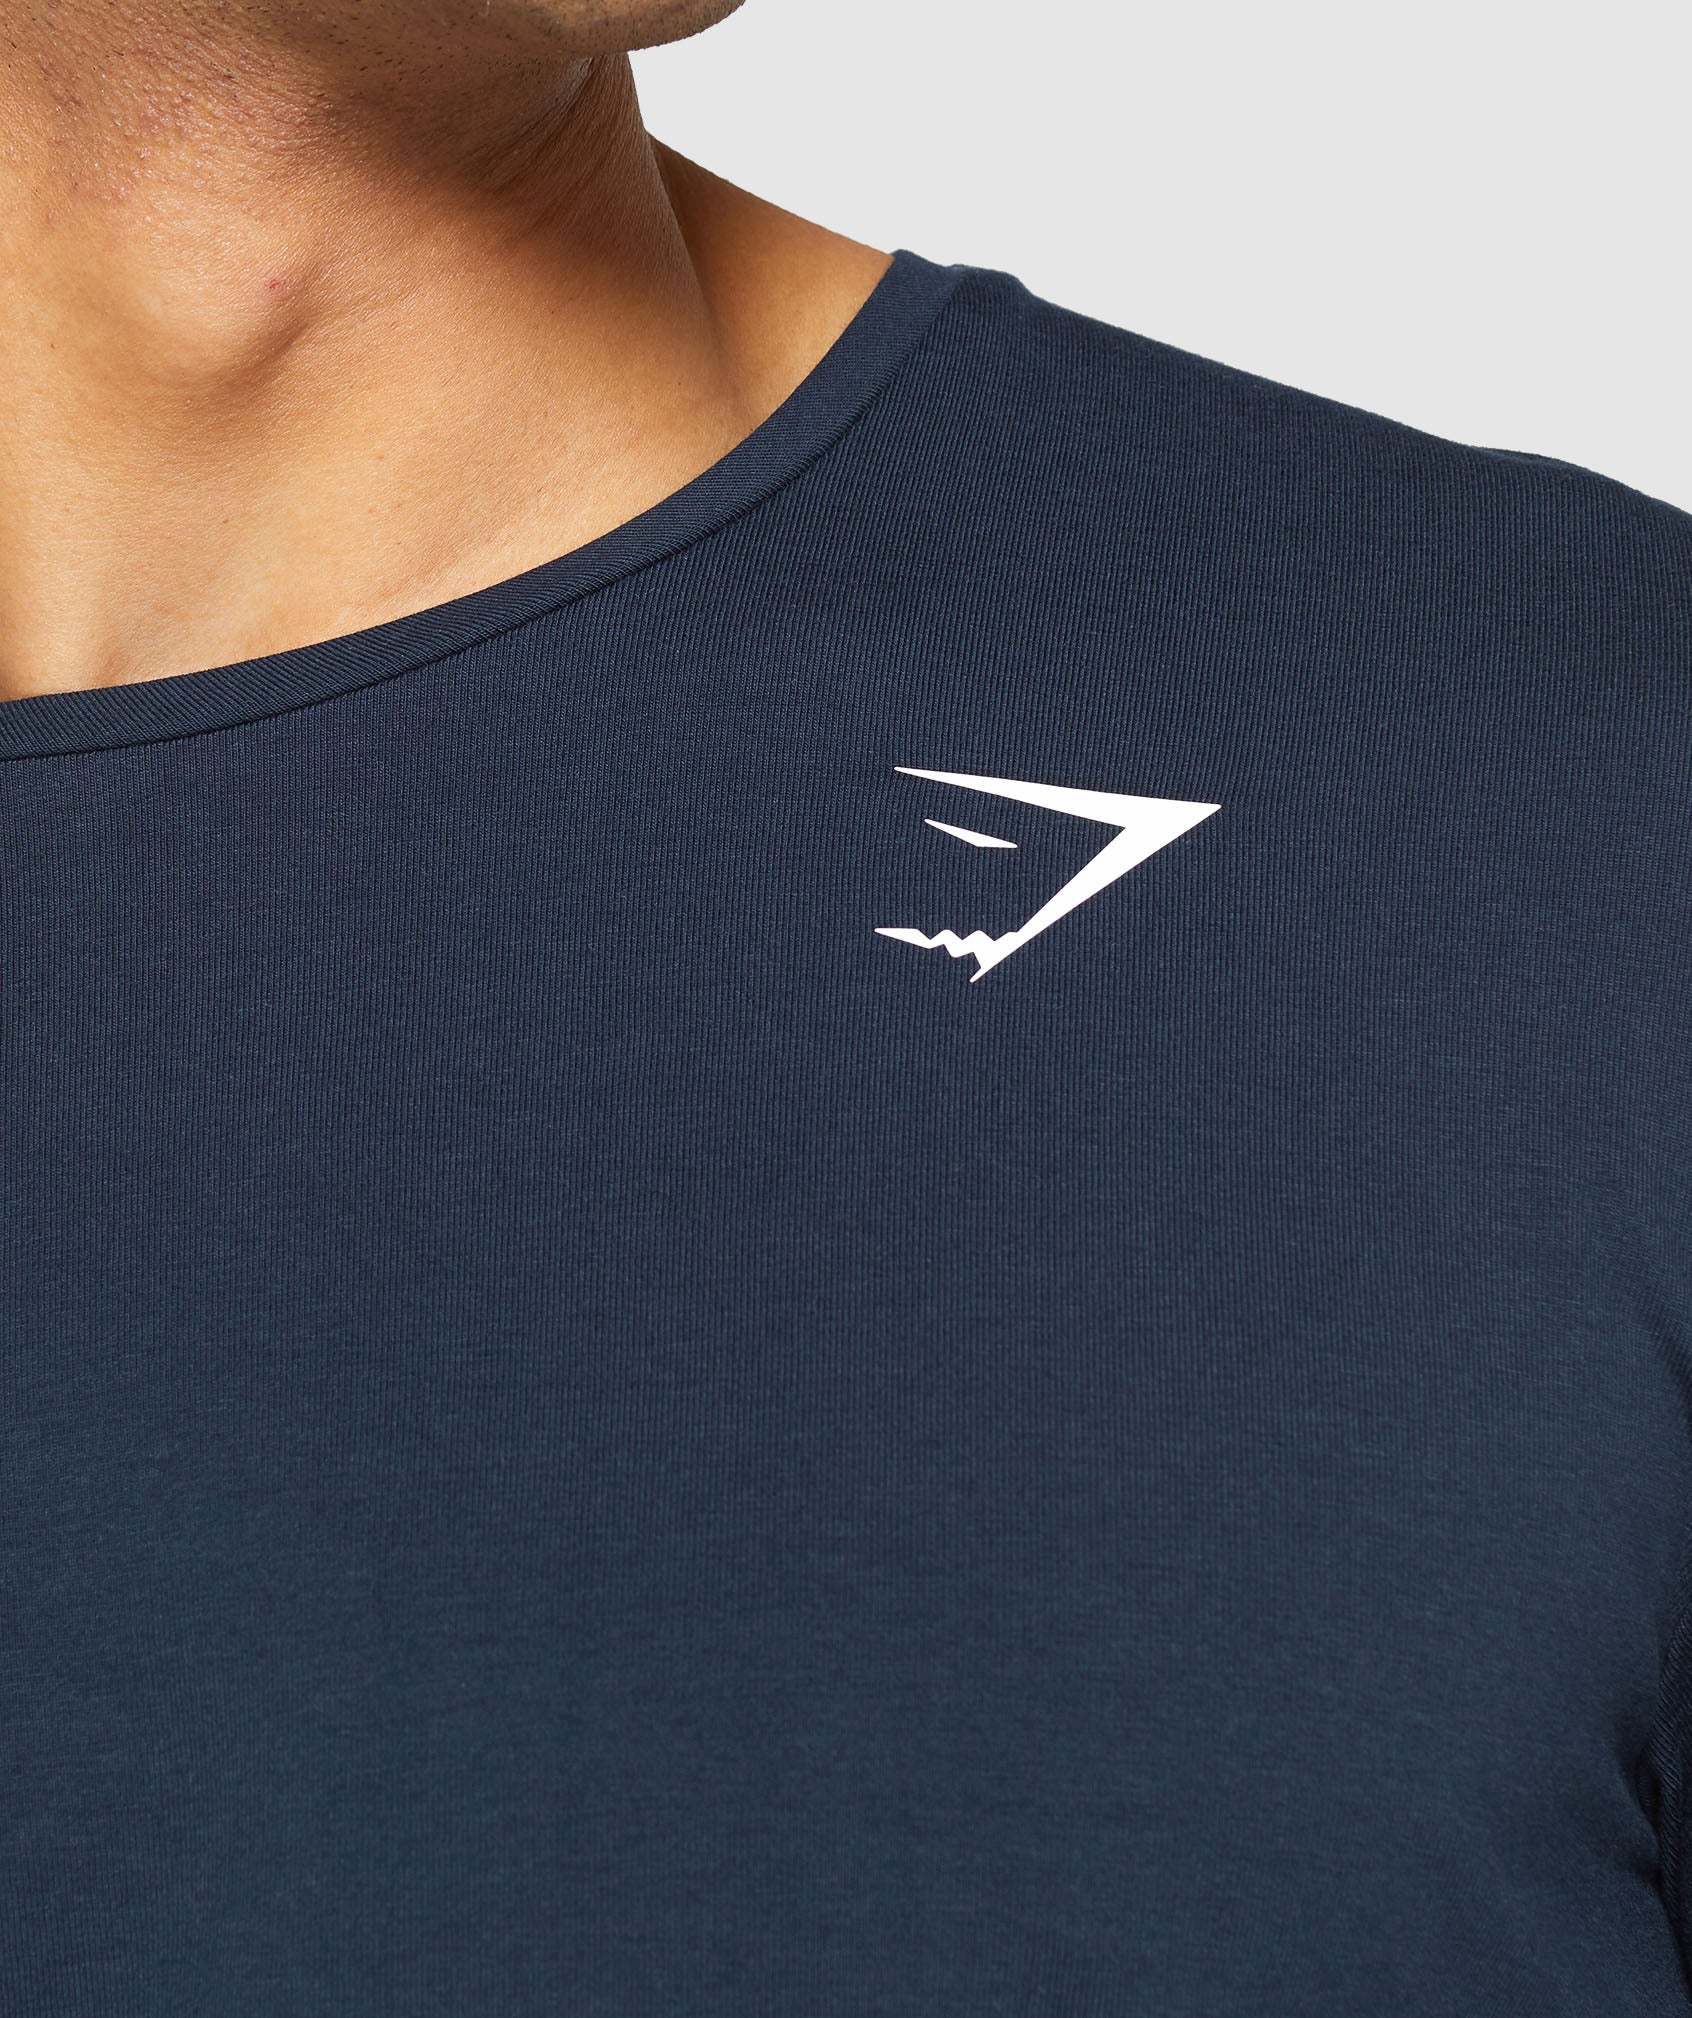 Essential T-Shirt in Navy - view 5